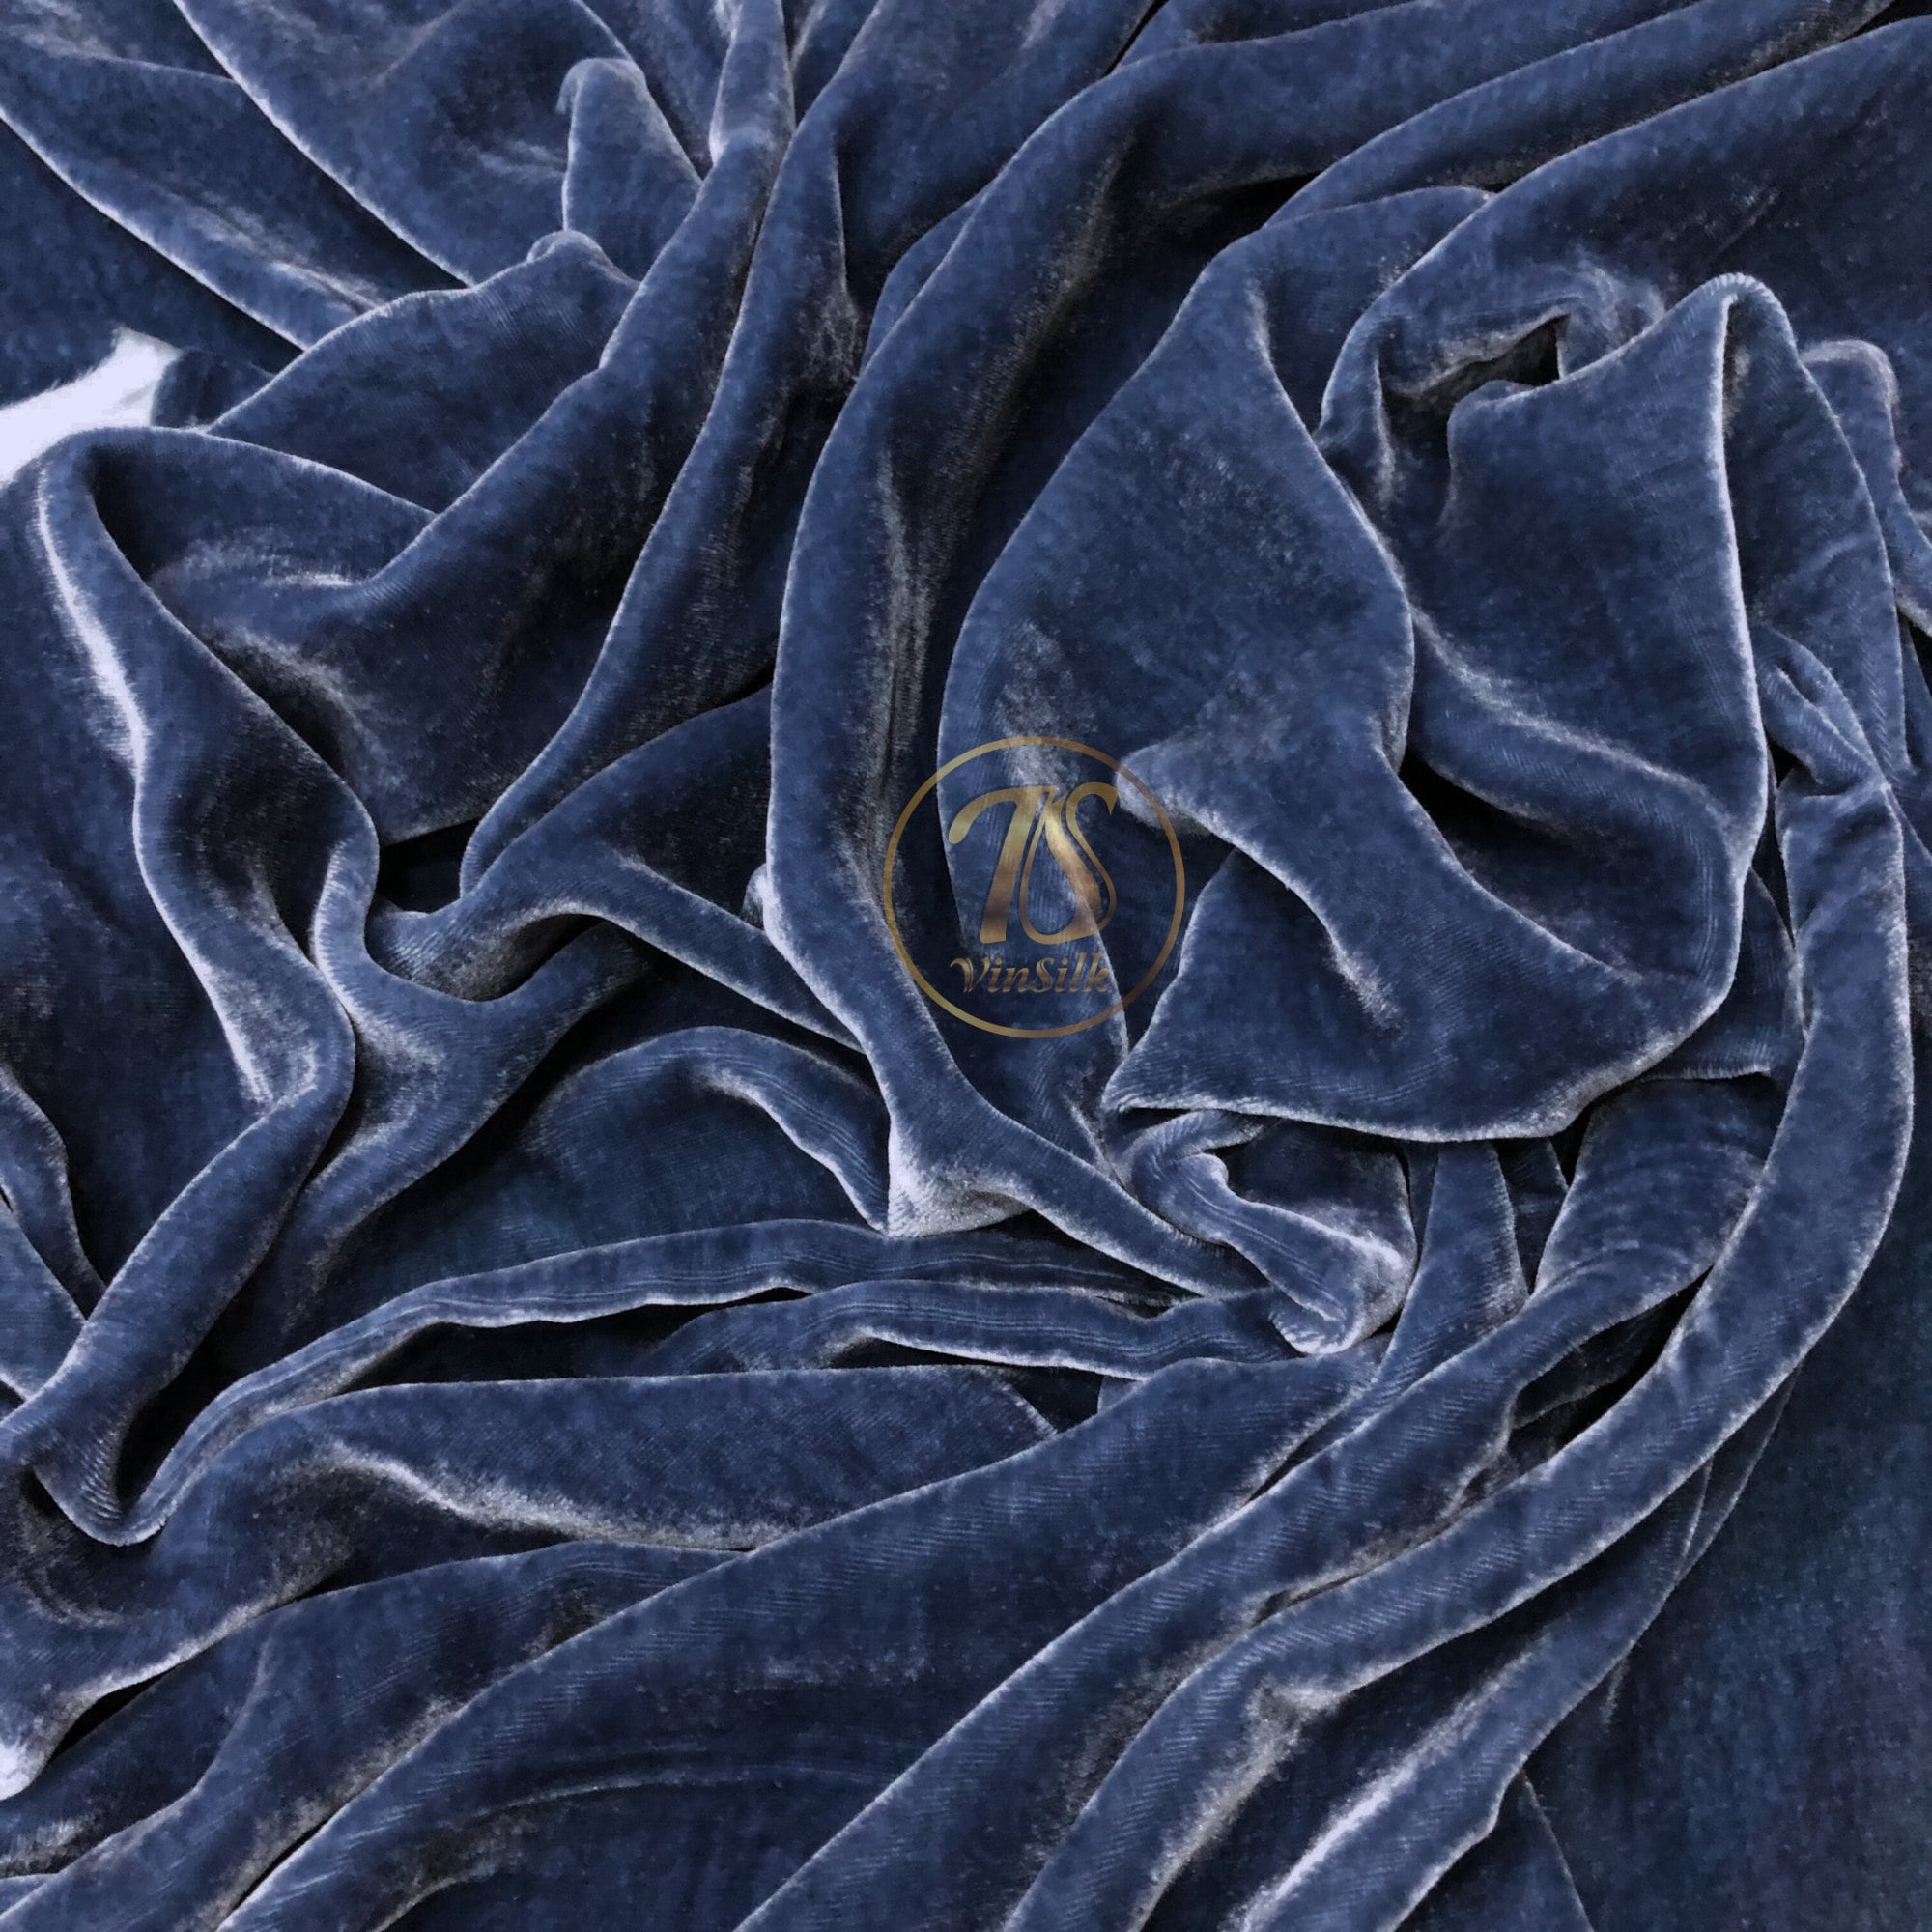 Dark Blue Authentic Cotton Velvet Upholstery Fabric By The Yard